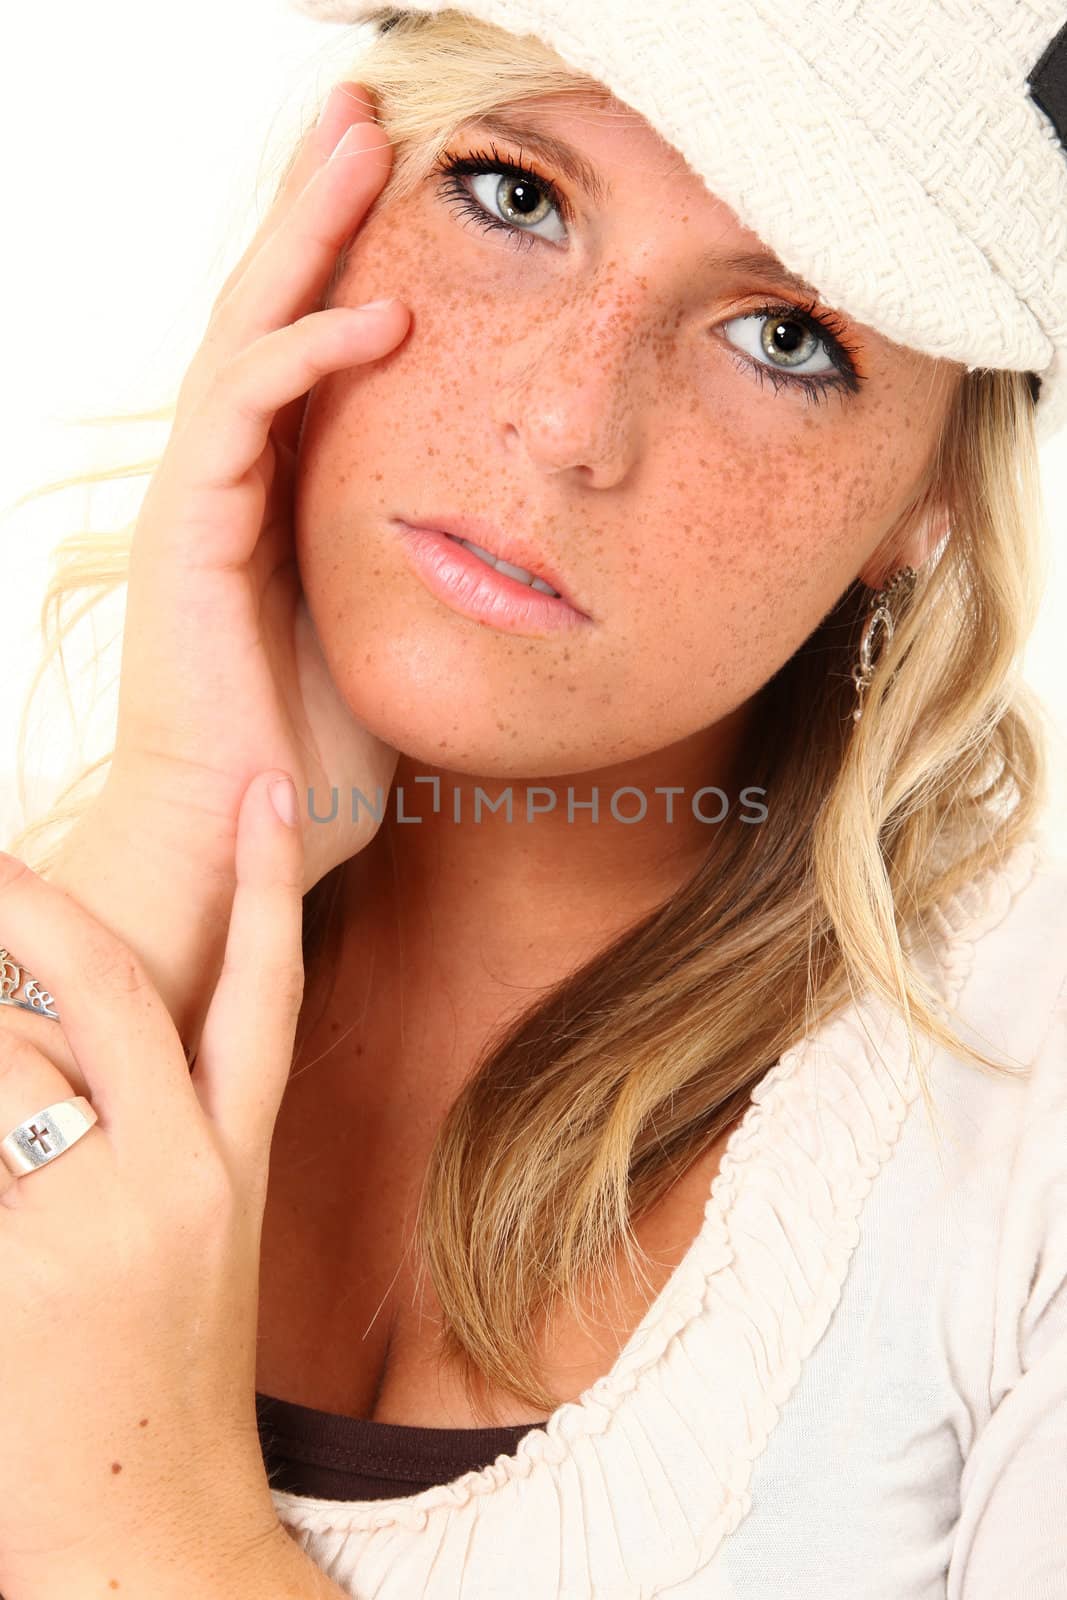 Beautiful young woman with freckles and blond hair over white.